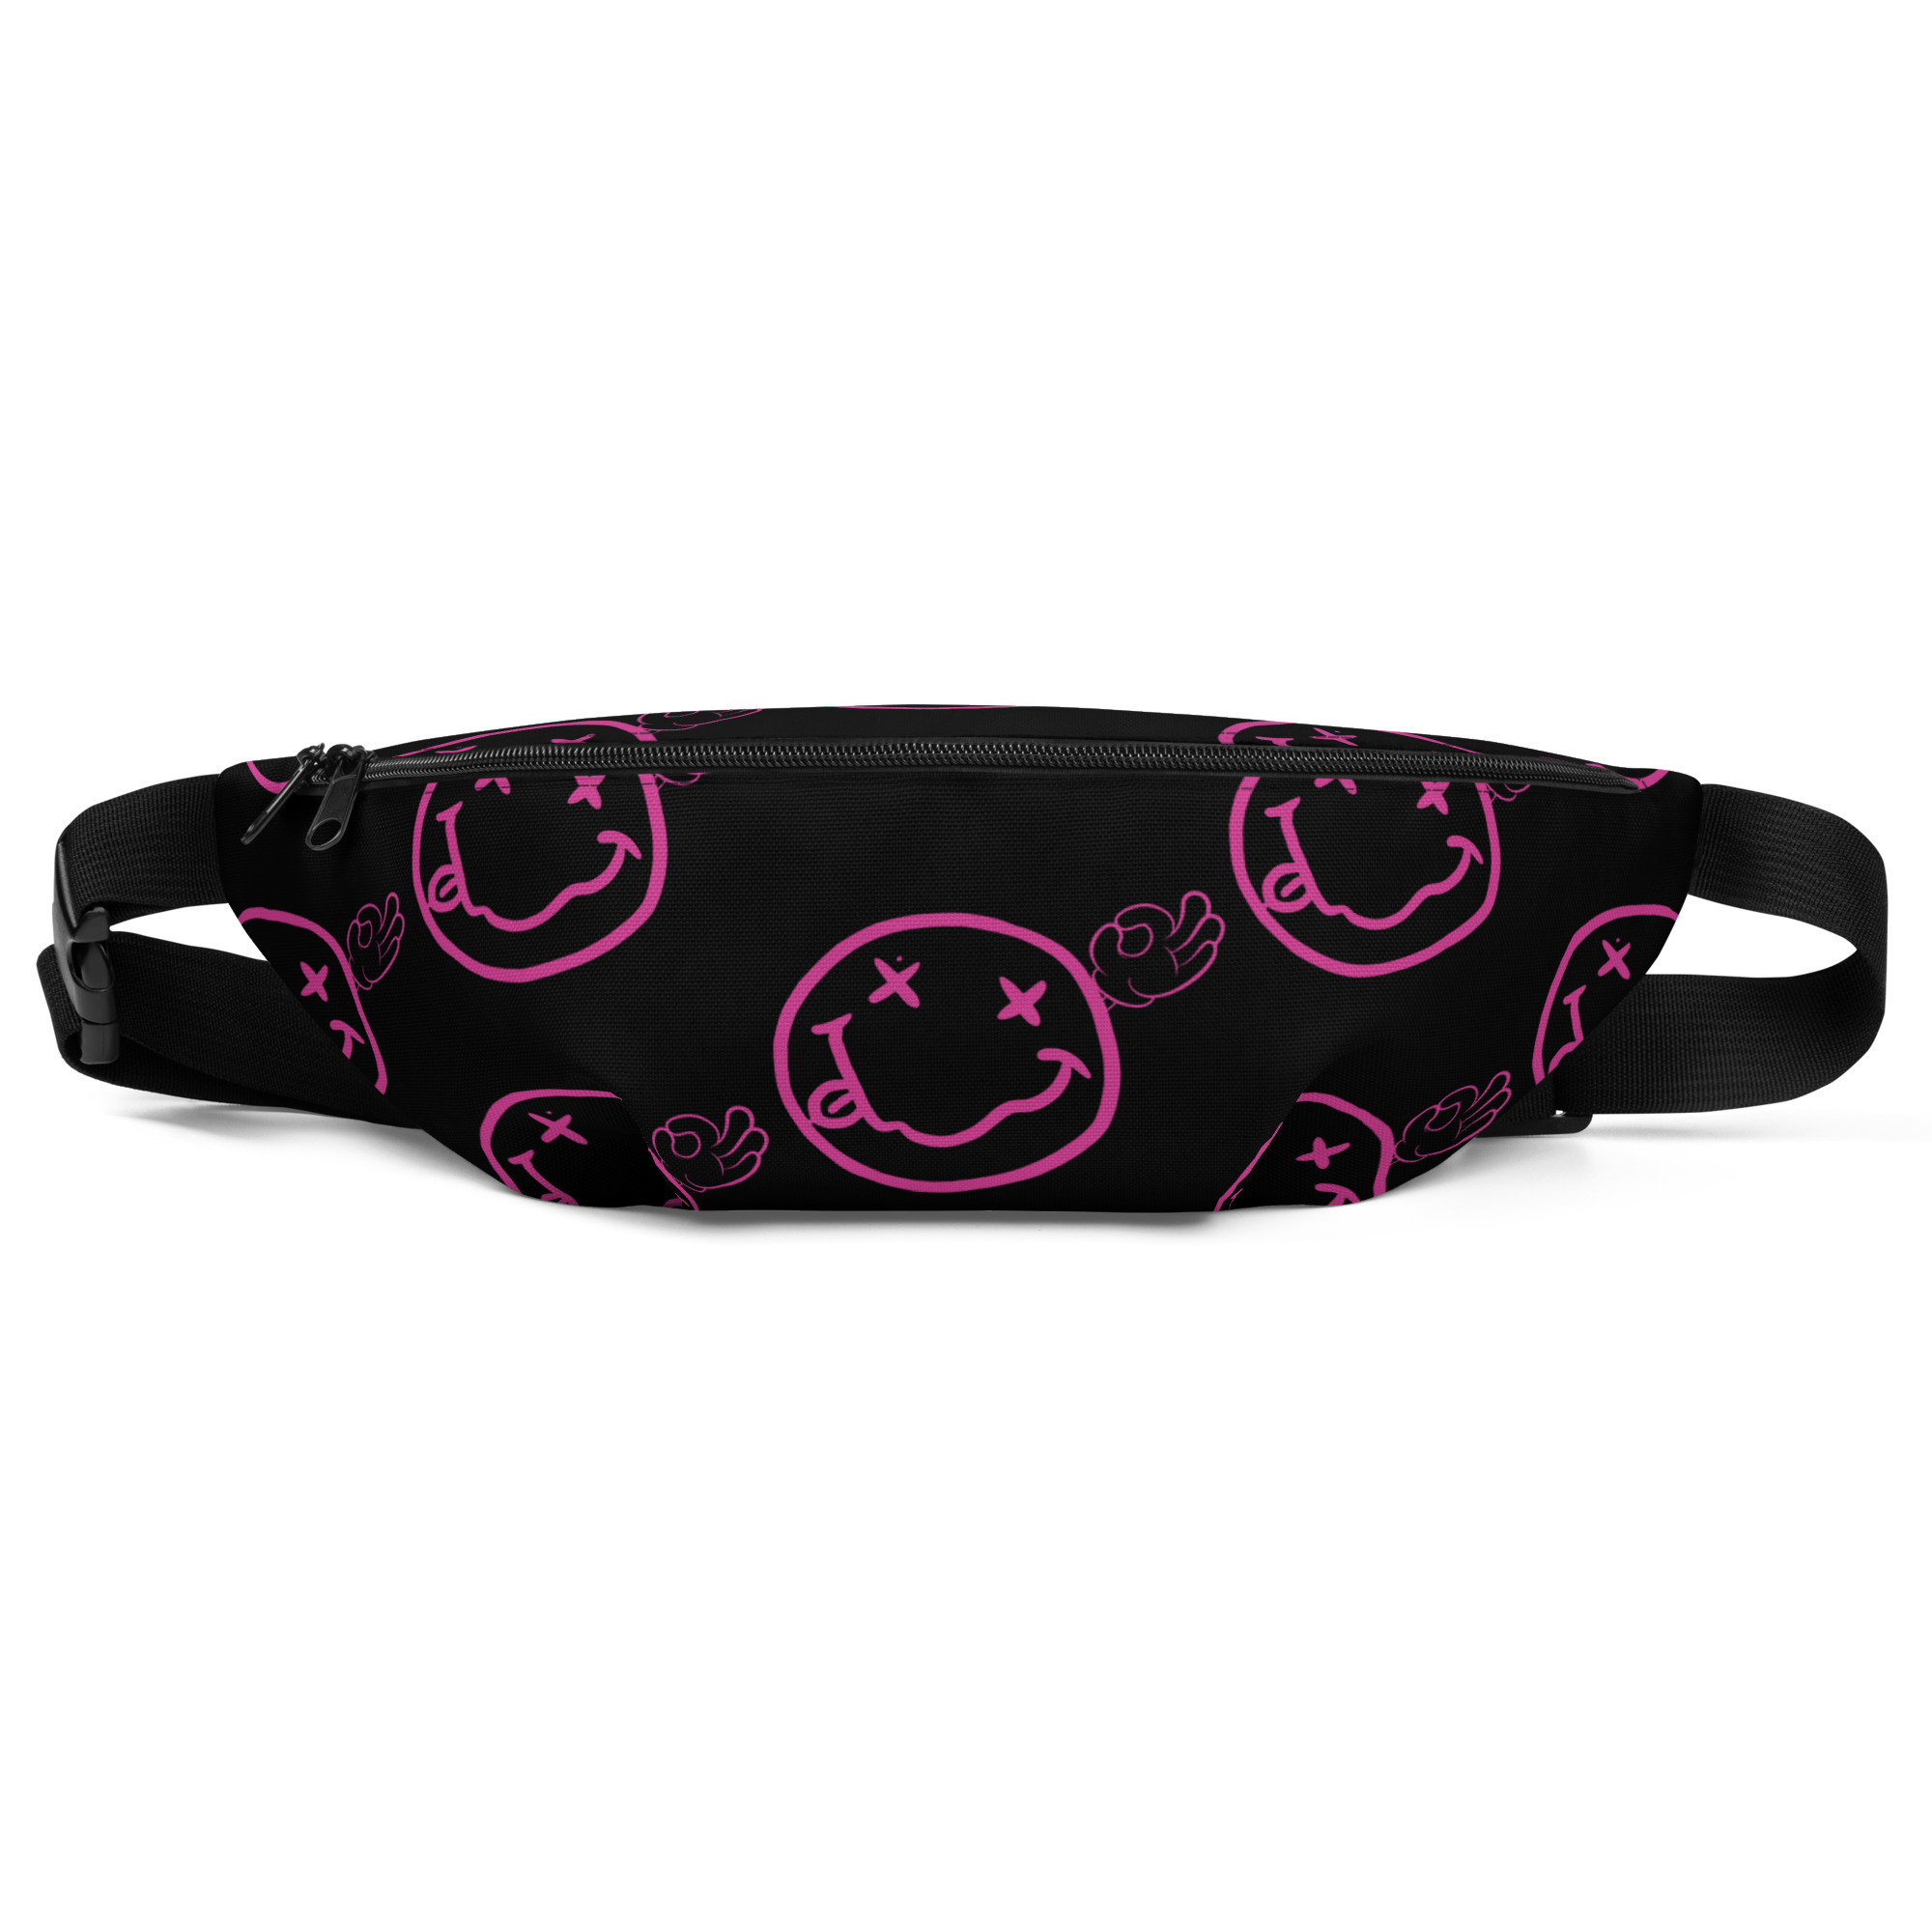 Two Tone College 3 TKDWN Fanny Pack